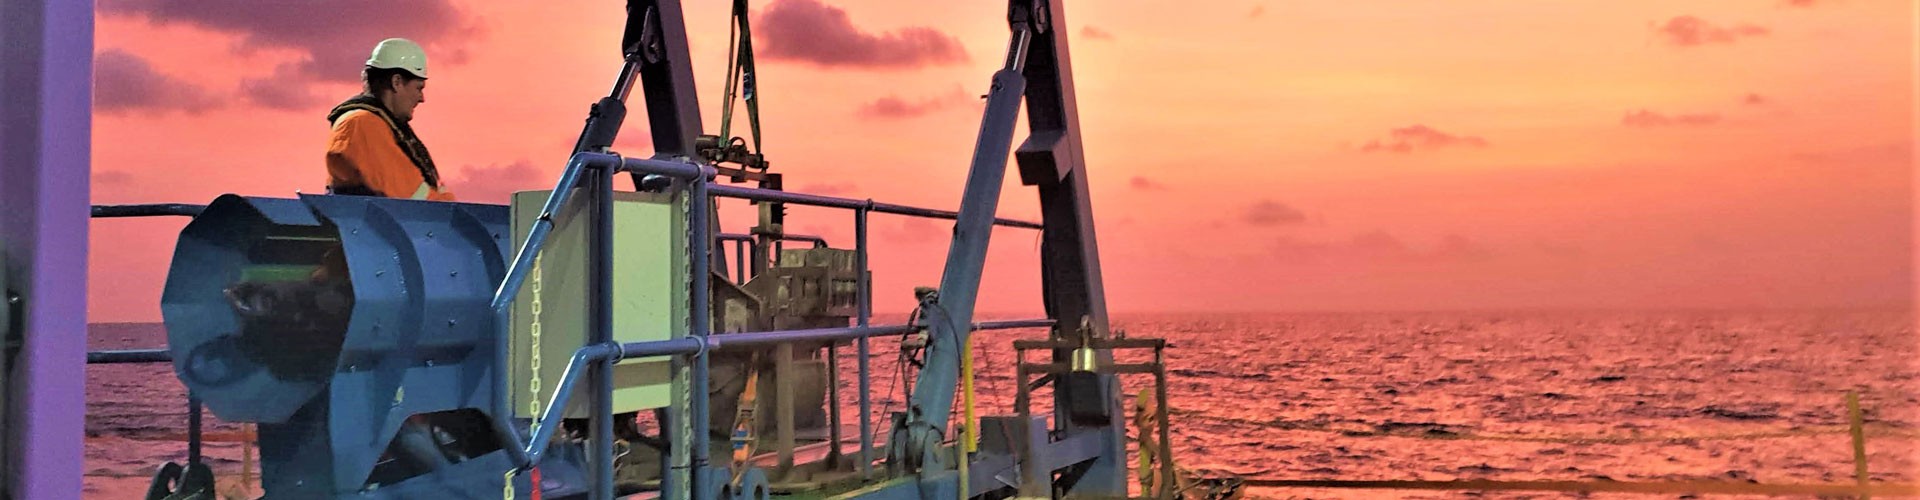 Feritech Global machinery at sea with sunset